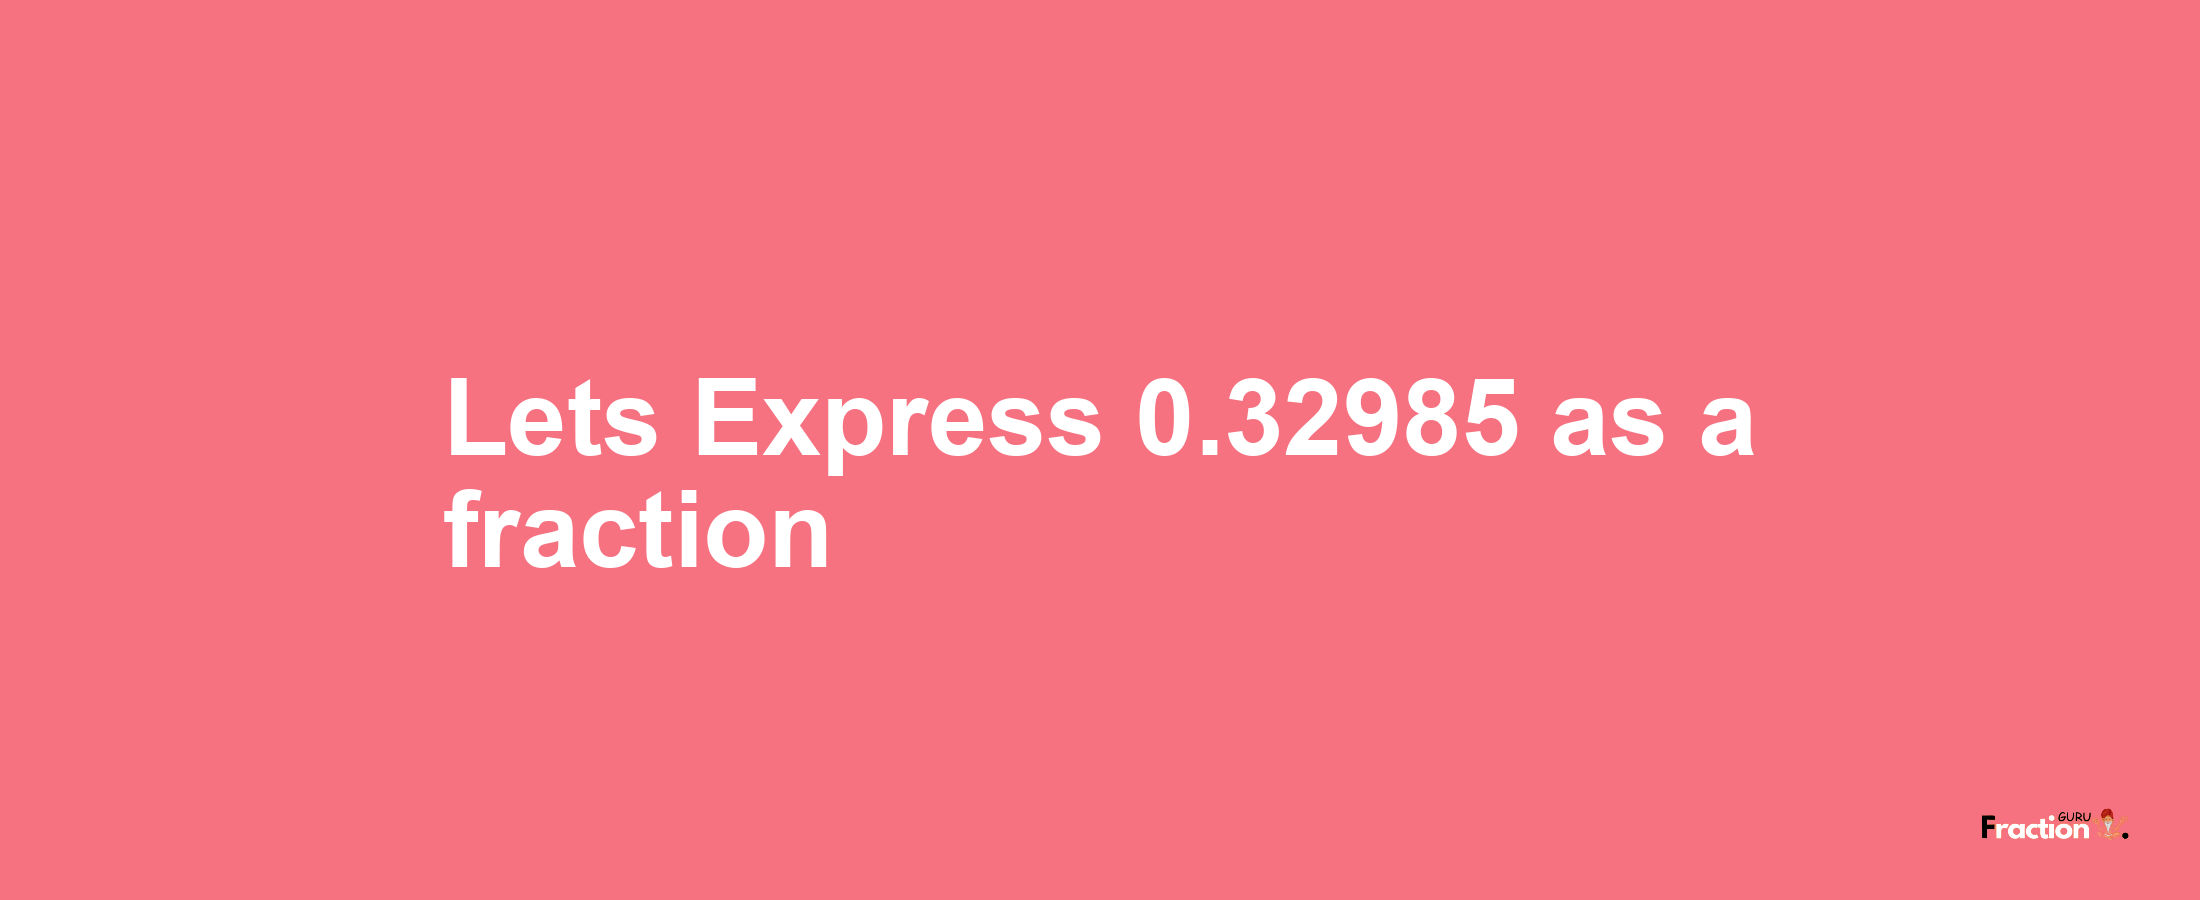 Lets Express 0.32985 as afraction